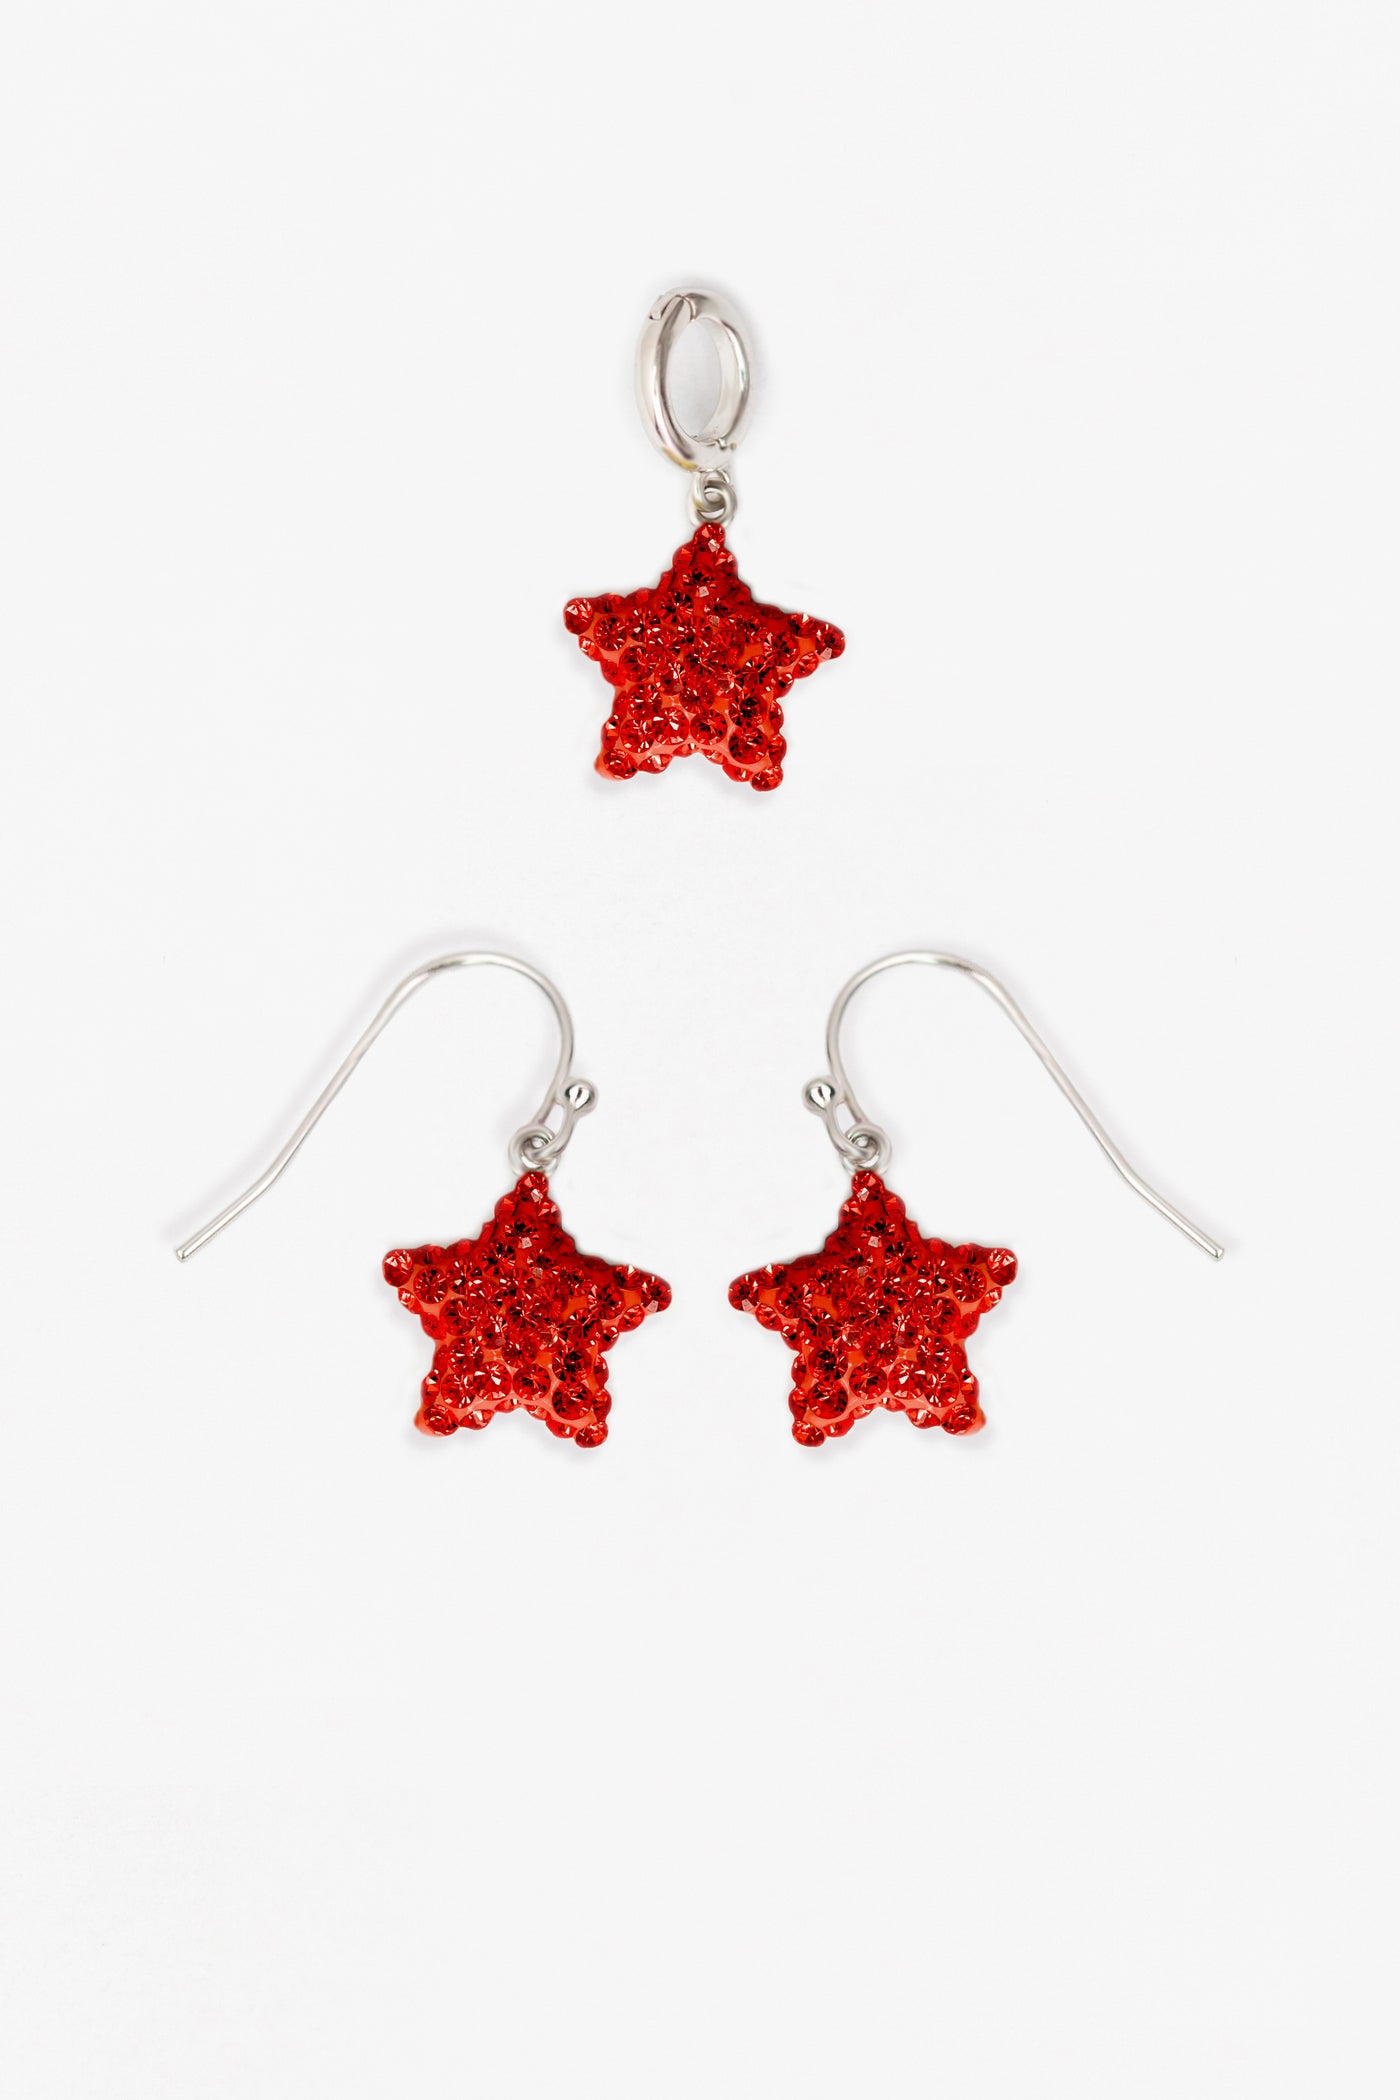 Red Star Crystal Sterling Silver Earrings and Charm Set | Annie and Sisters